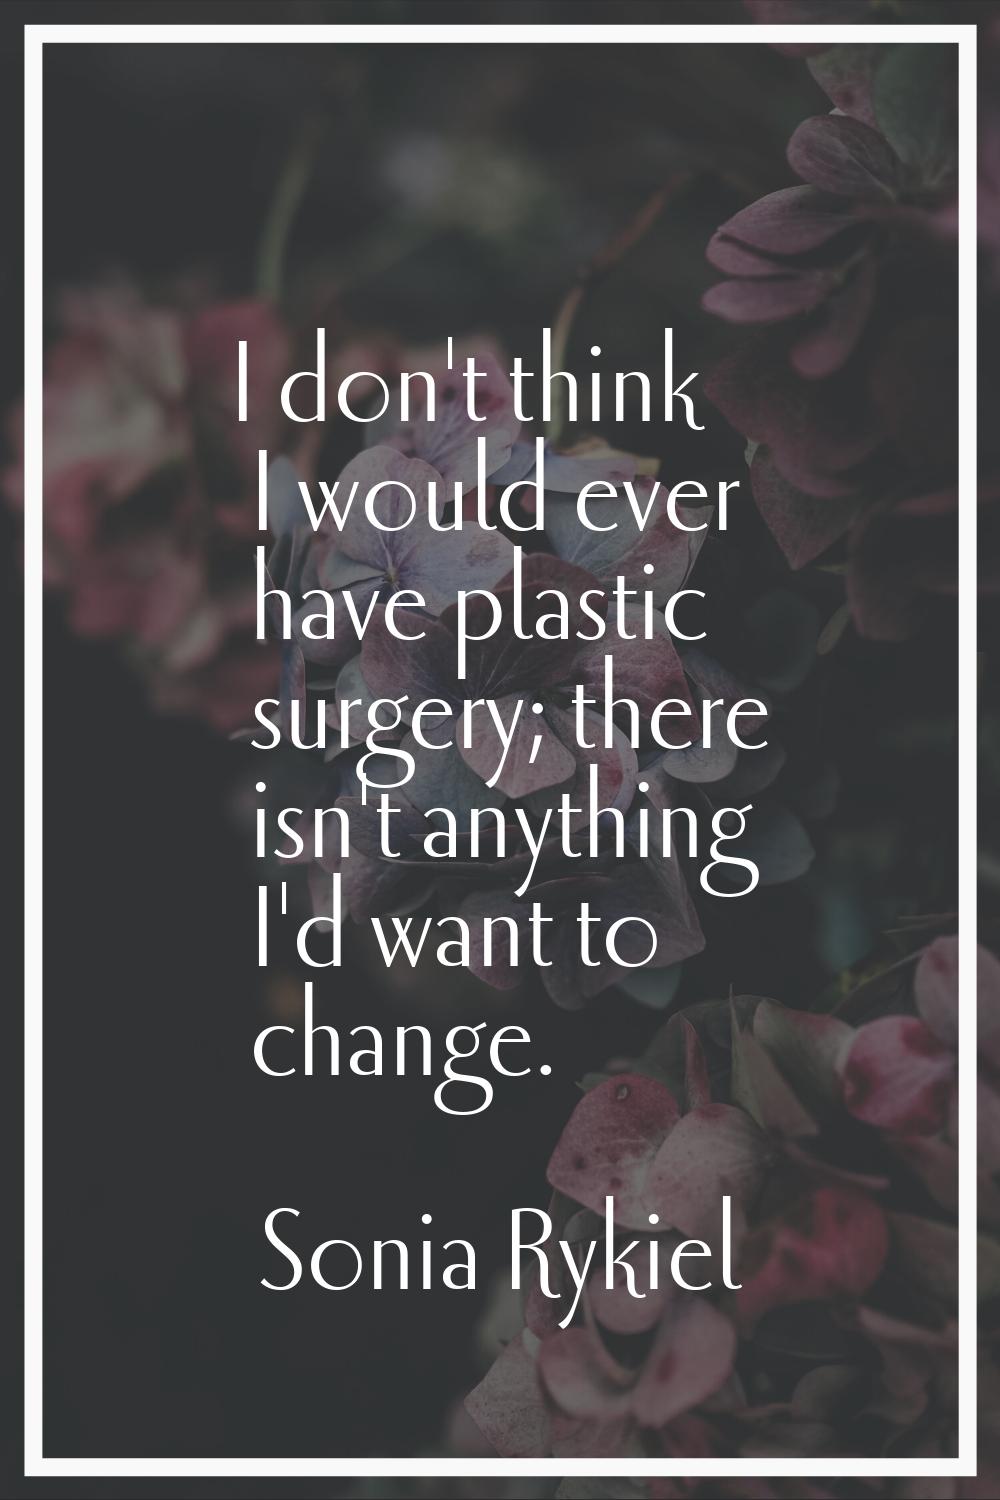 I don't think I would ever have plastic surgery; there isn't anything I'd want to change.